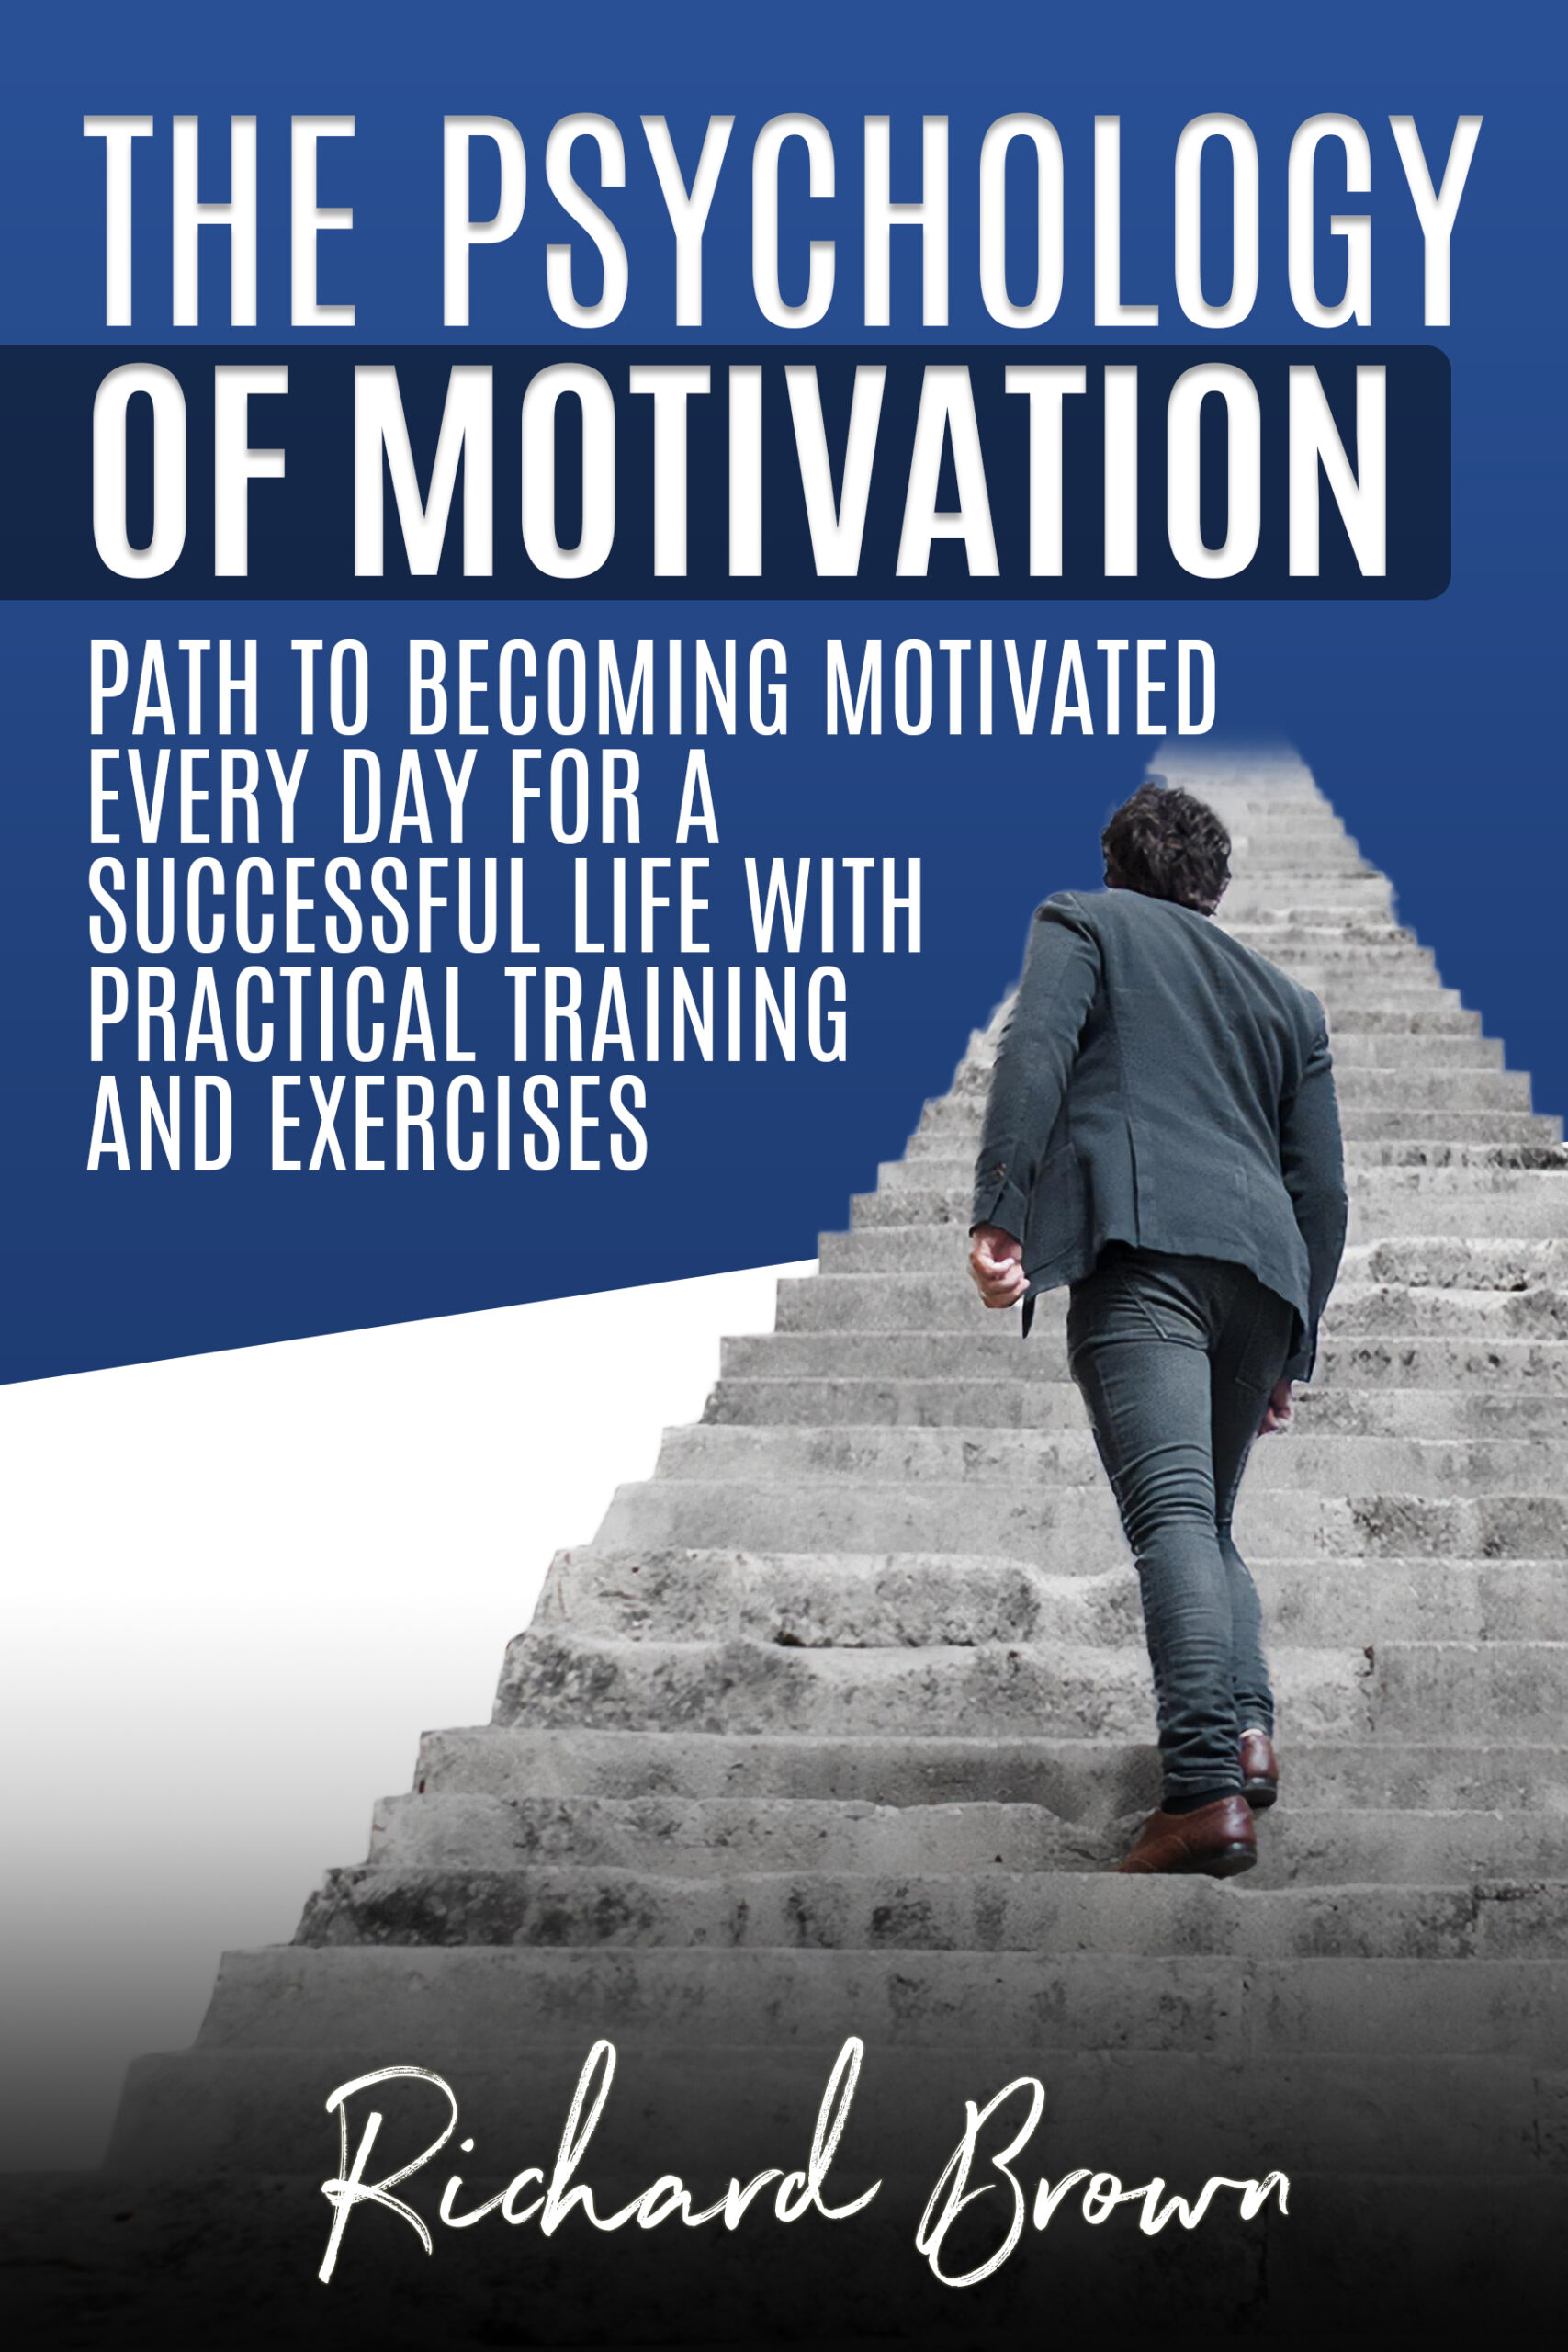 FREE: The Psychology of Motivation: Path to Becoming Motivated Every Day for a Successful Life with Practical Training and Exercises by Richard Brown